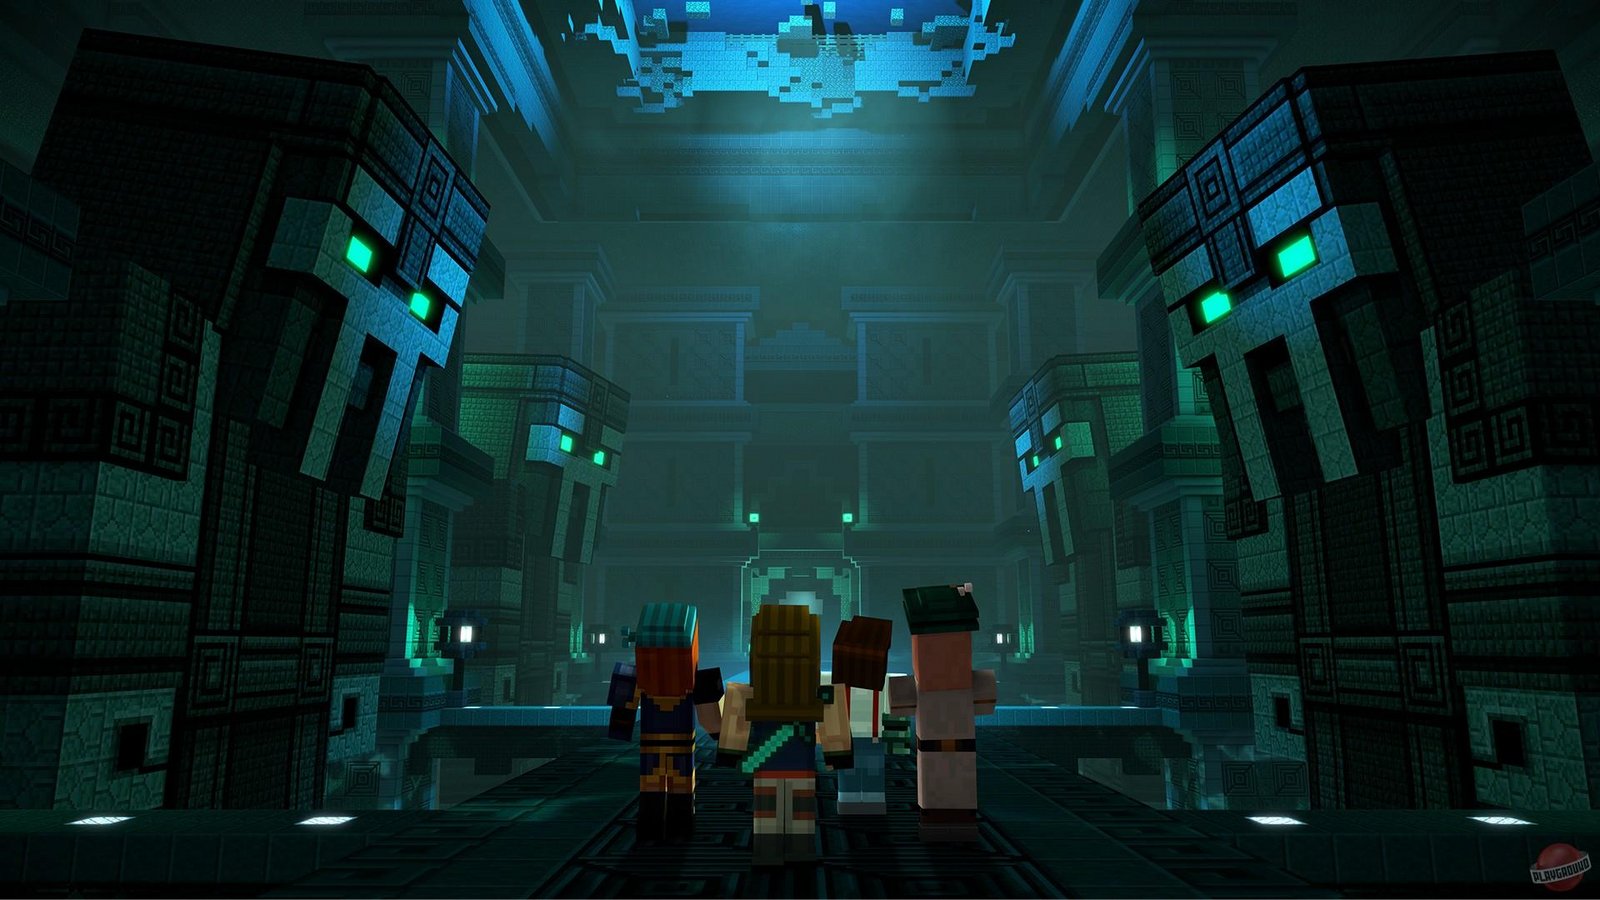 Minecraft: Story Mode - Season Two - Episode 2: Giant Consequences